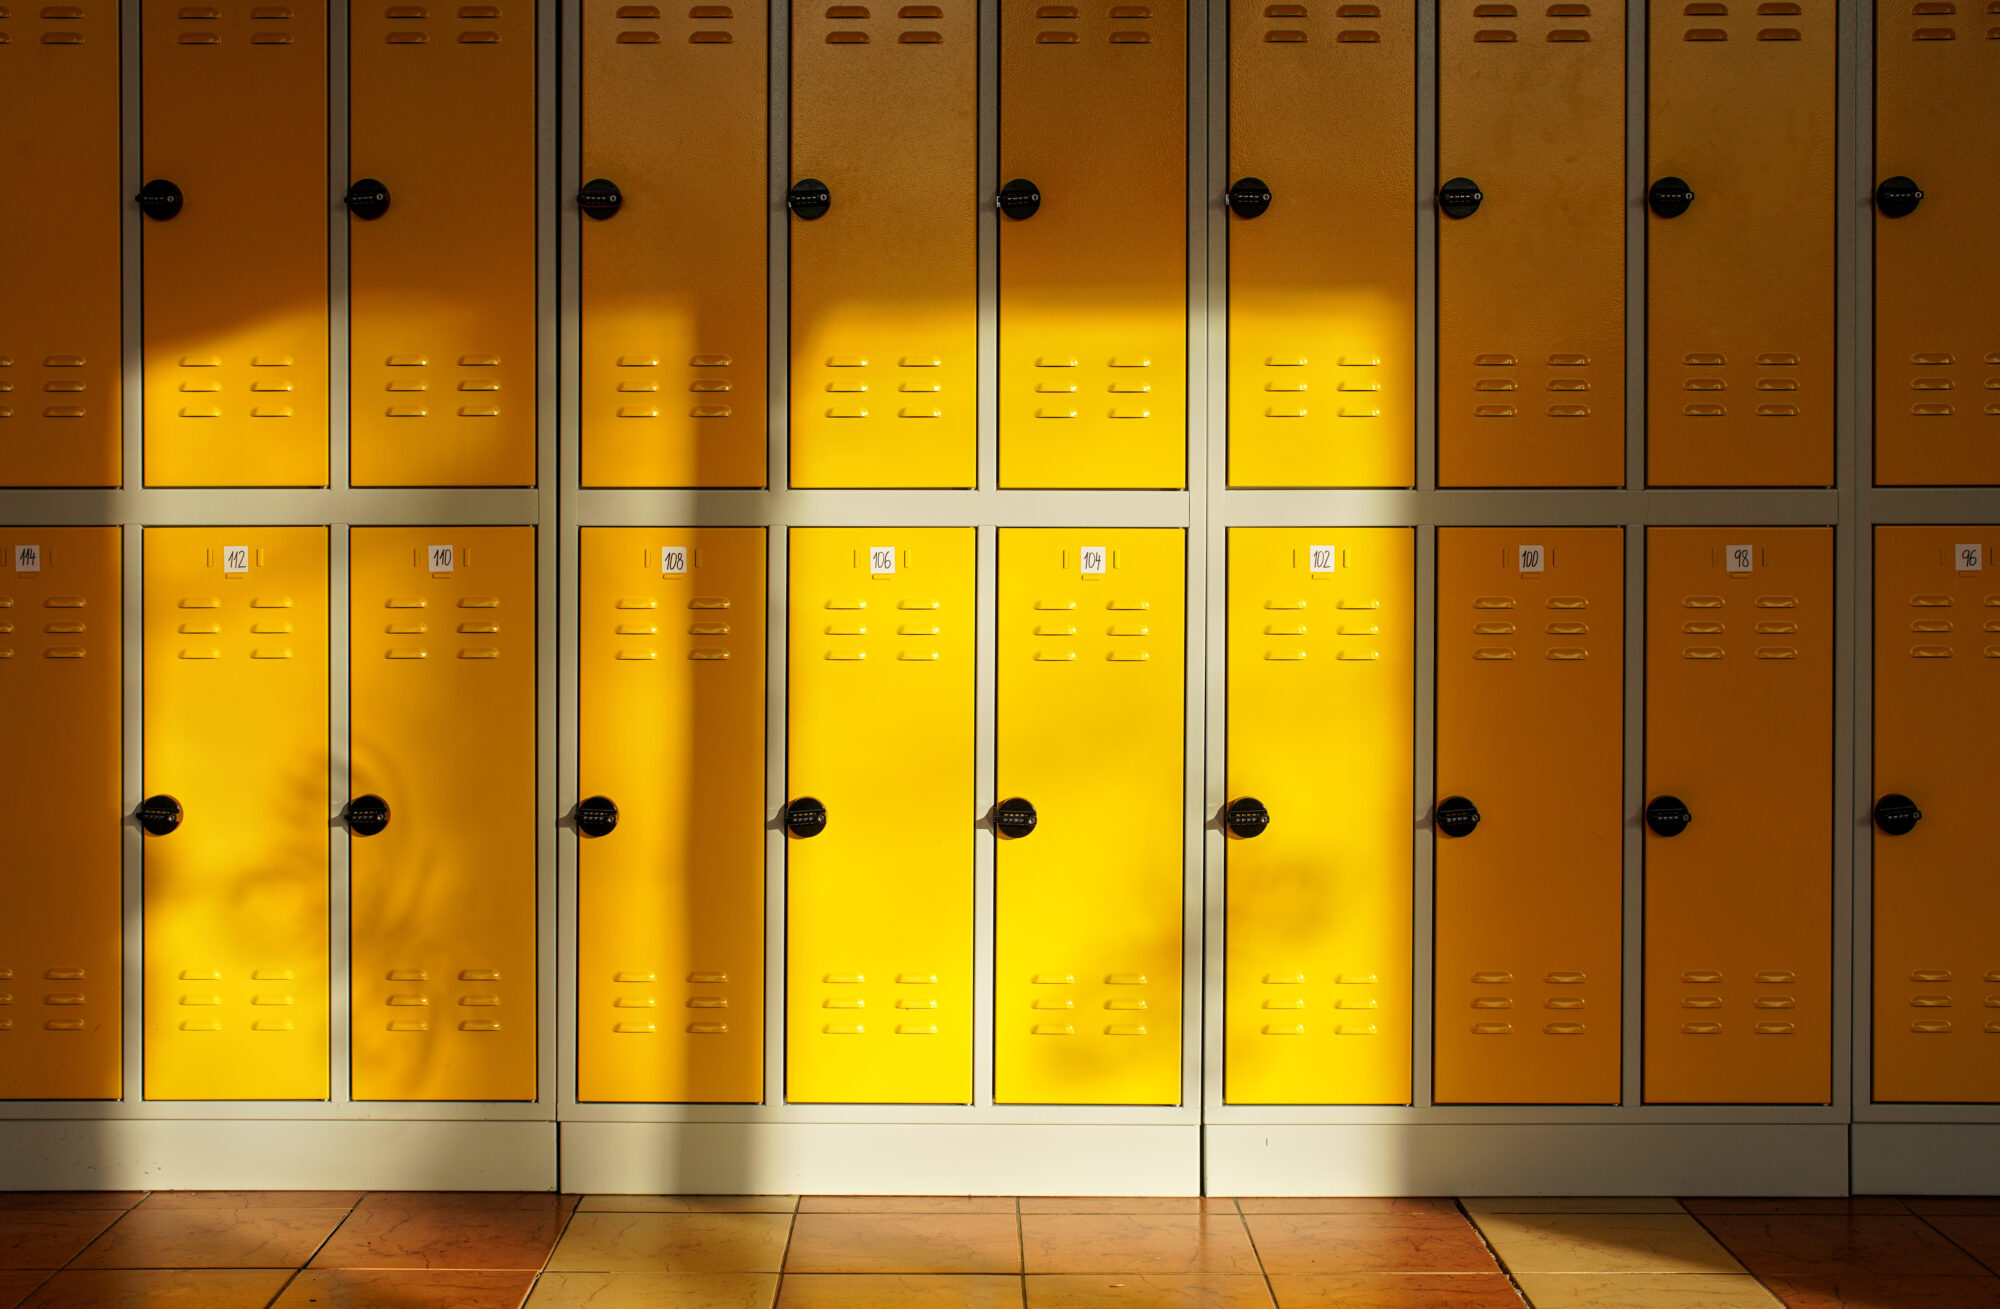 Sun shines on empty school hallway, numbered lockers at the wall. (Photo by Lubo Ivanko, Adobe Stock)